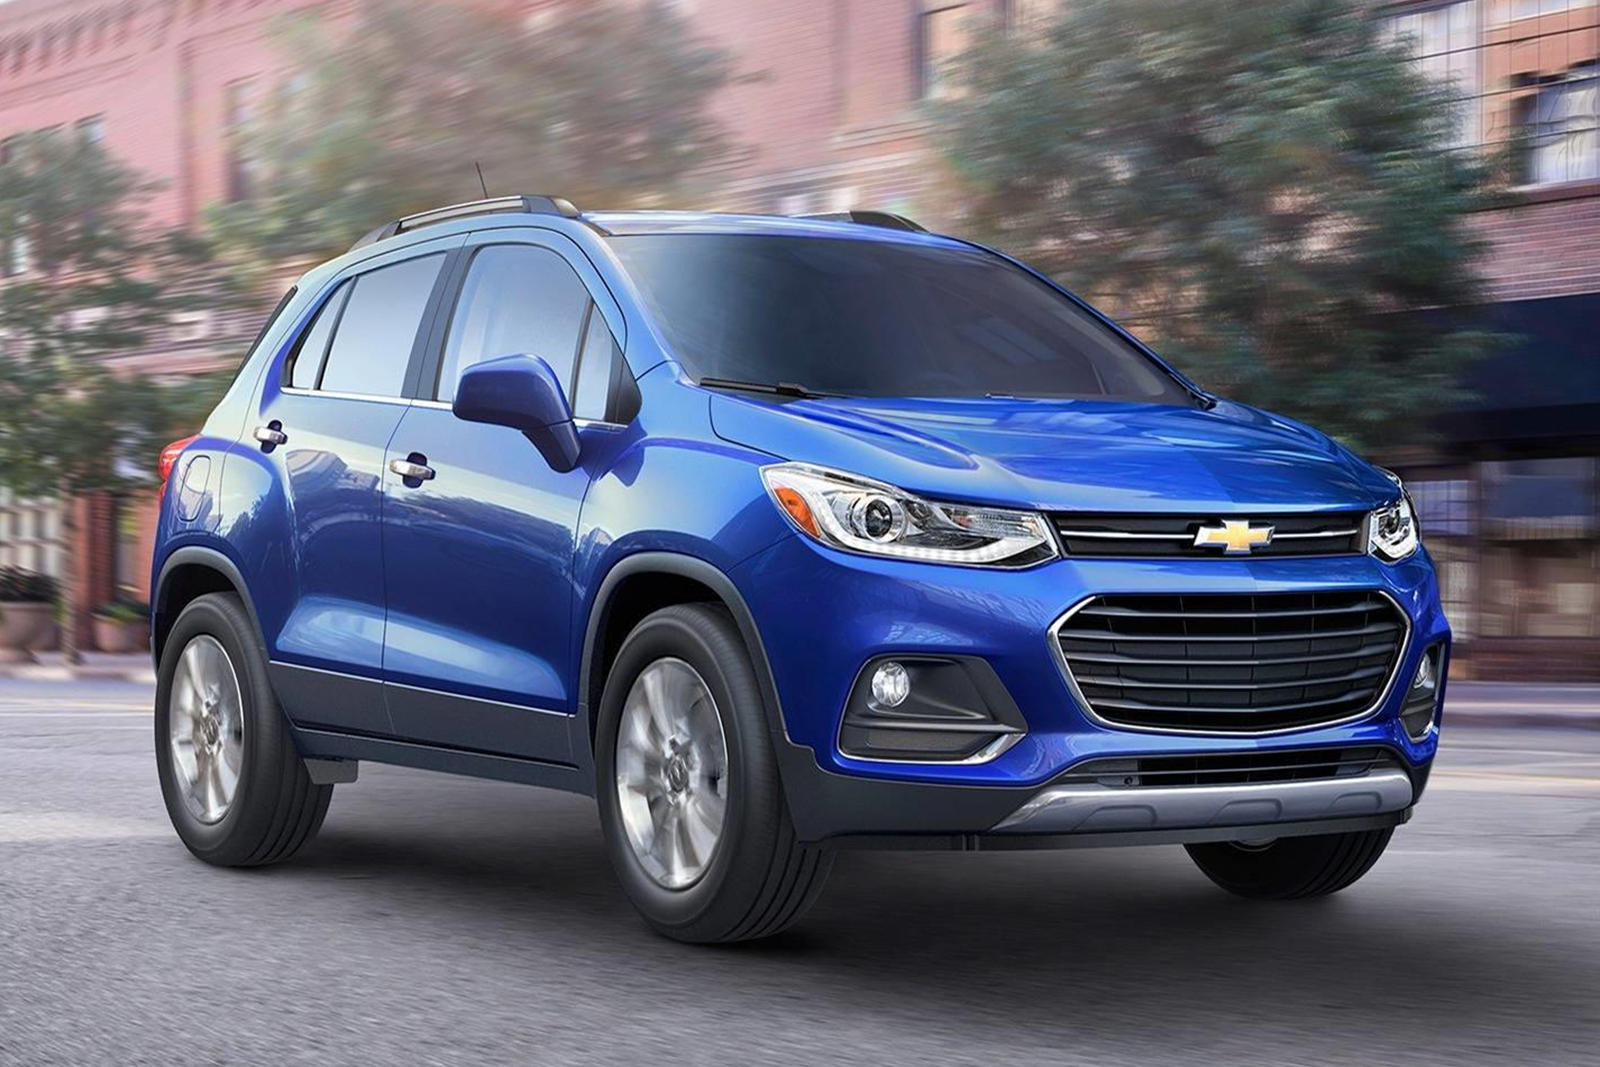 2017 Chevrolet Trax Front View Driving